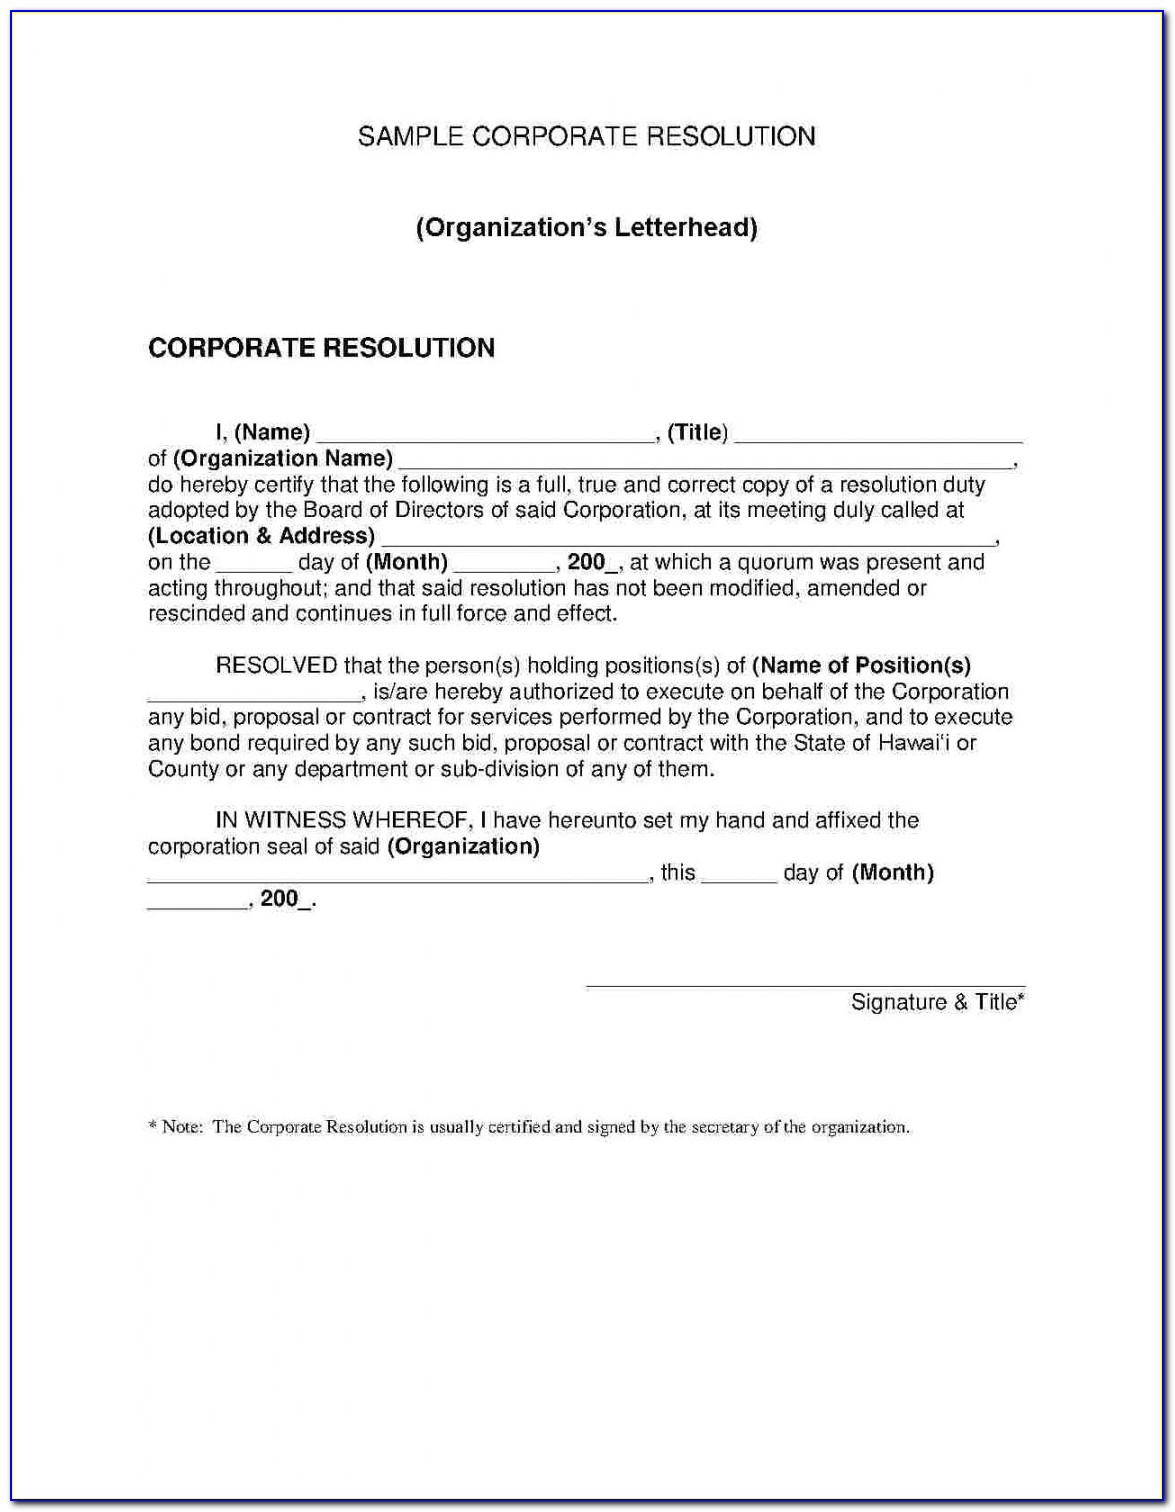 Corporate Resolution Identifying Authorized Signers Template